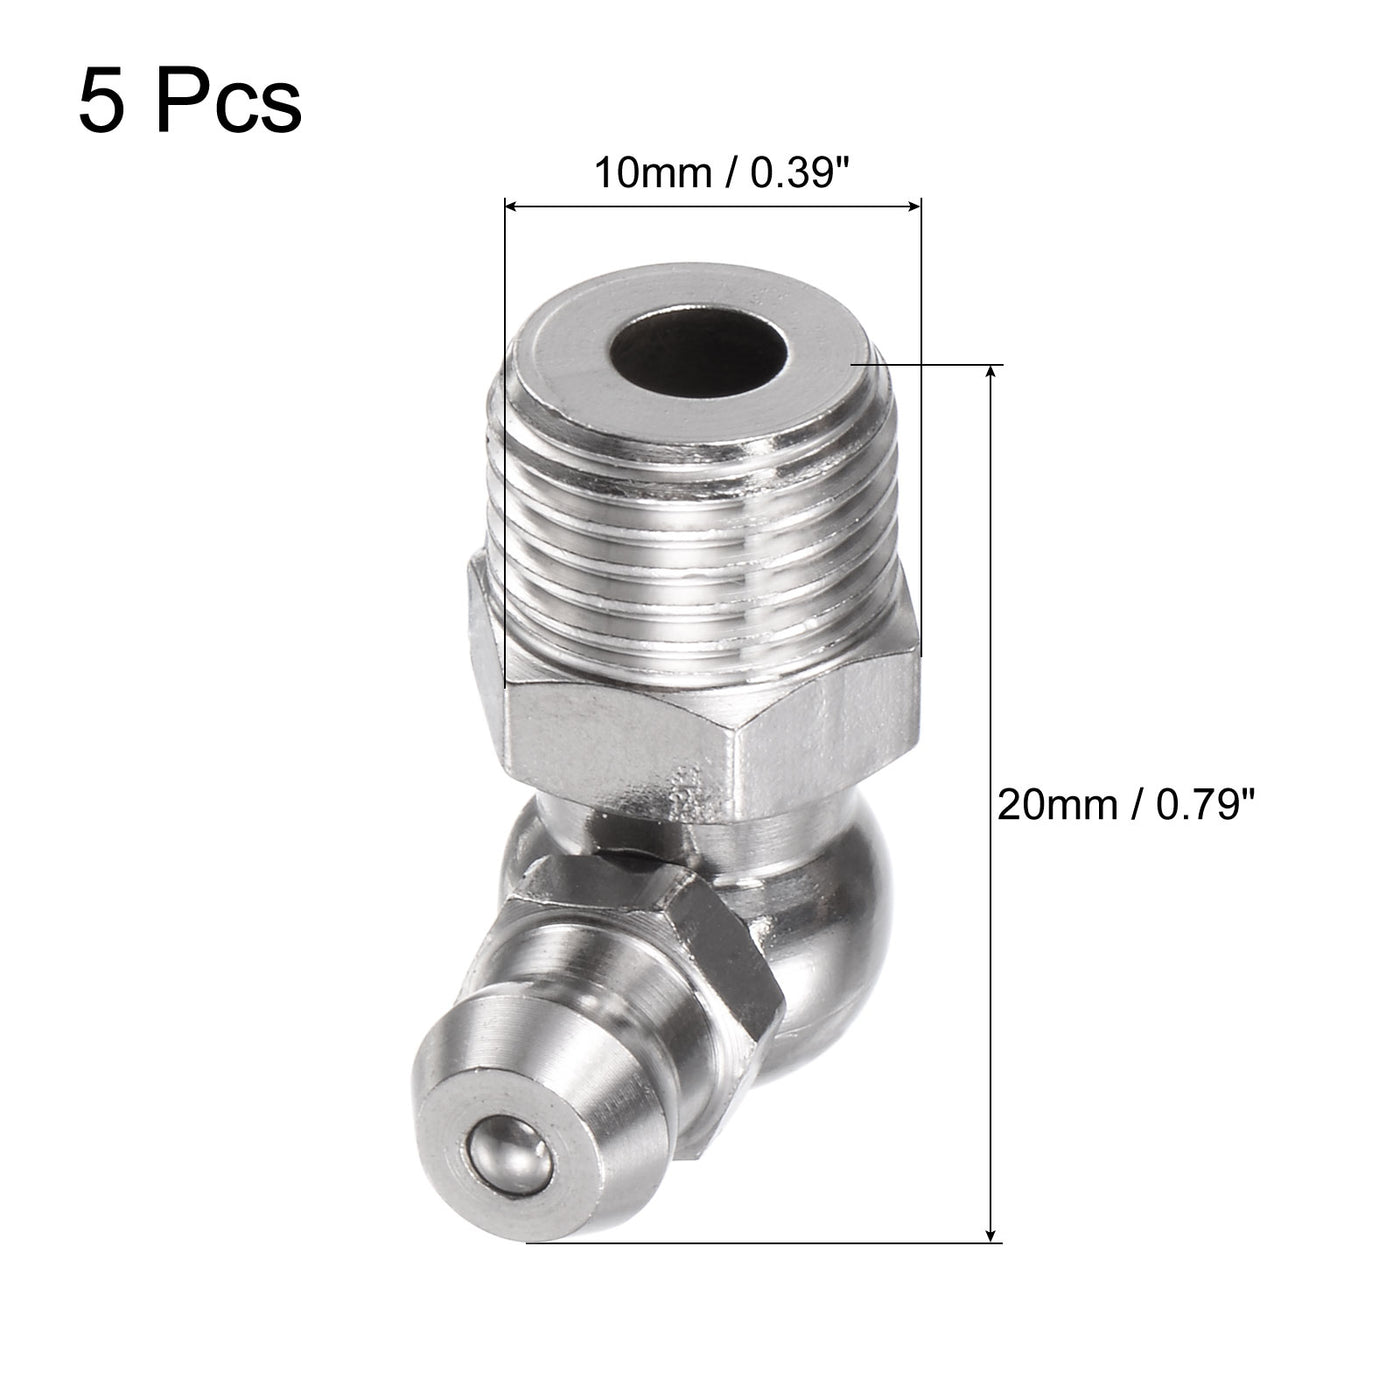 Uxcell Uxcell 304 Stainless Steel 90 Degree Hydraulic Grease Fitting M10 x 1mm Thread, 5Pcs